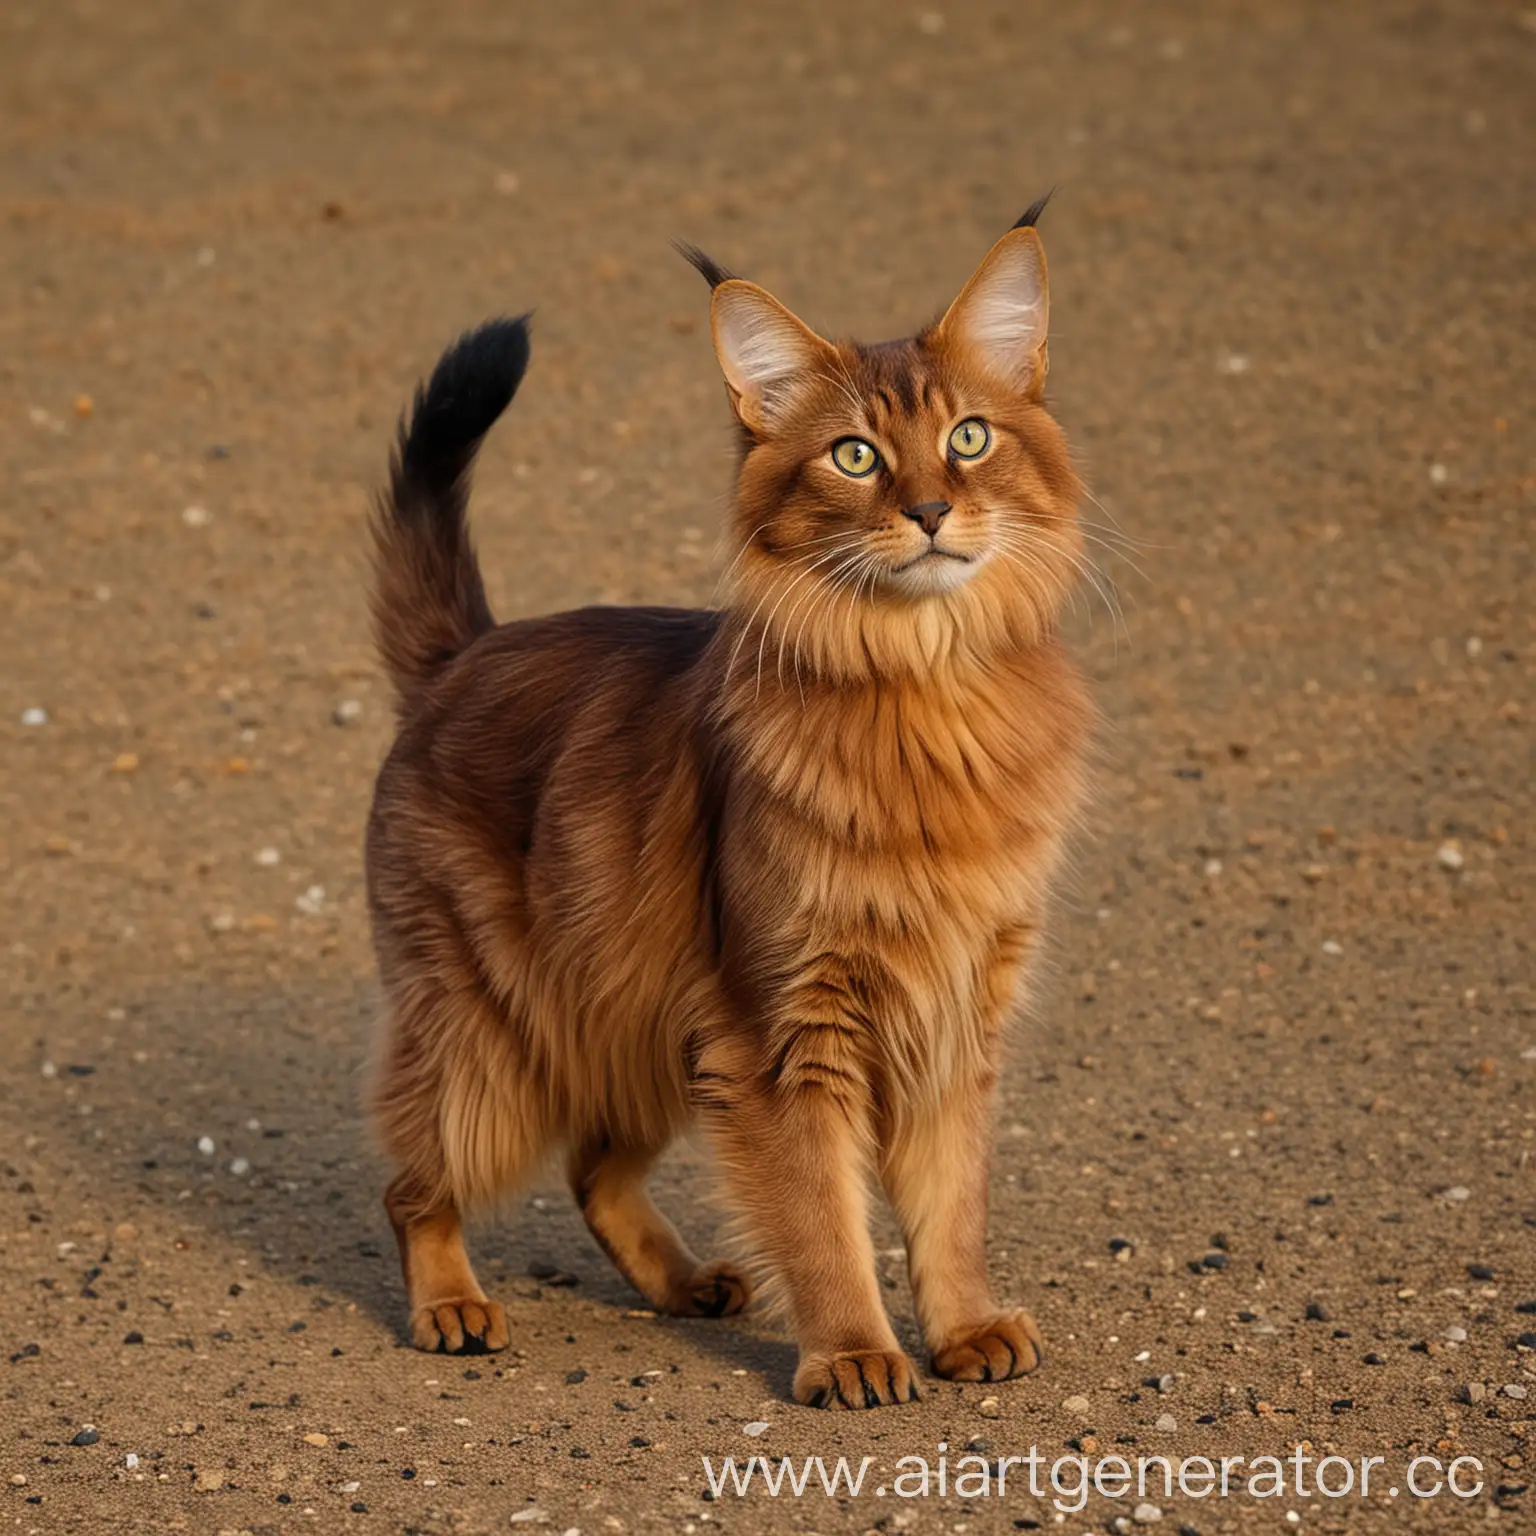 Playful-Somali-Cat-with-Lush-Fur-and-Expressive-Eyes